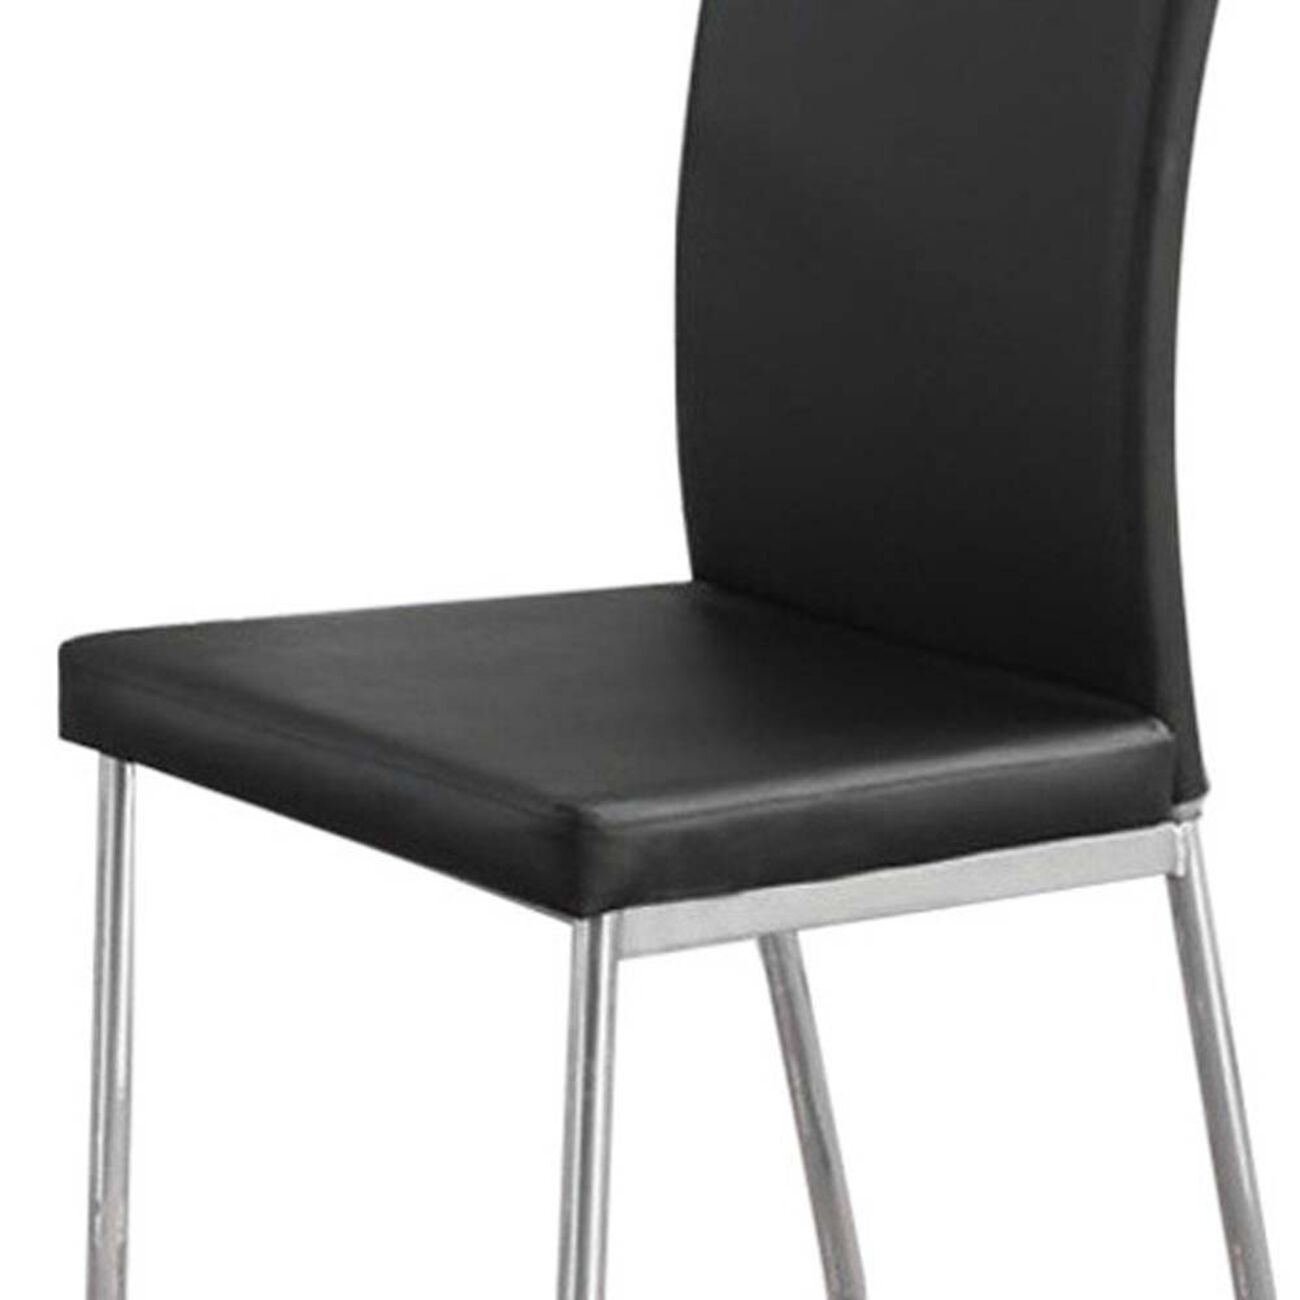 Leatherette Upholstered Padded Dining Chair with Tubular Metal Legs, Set of Four, Black and Silver